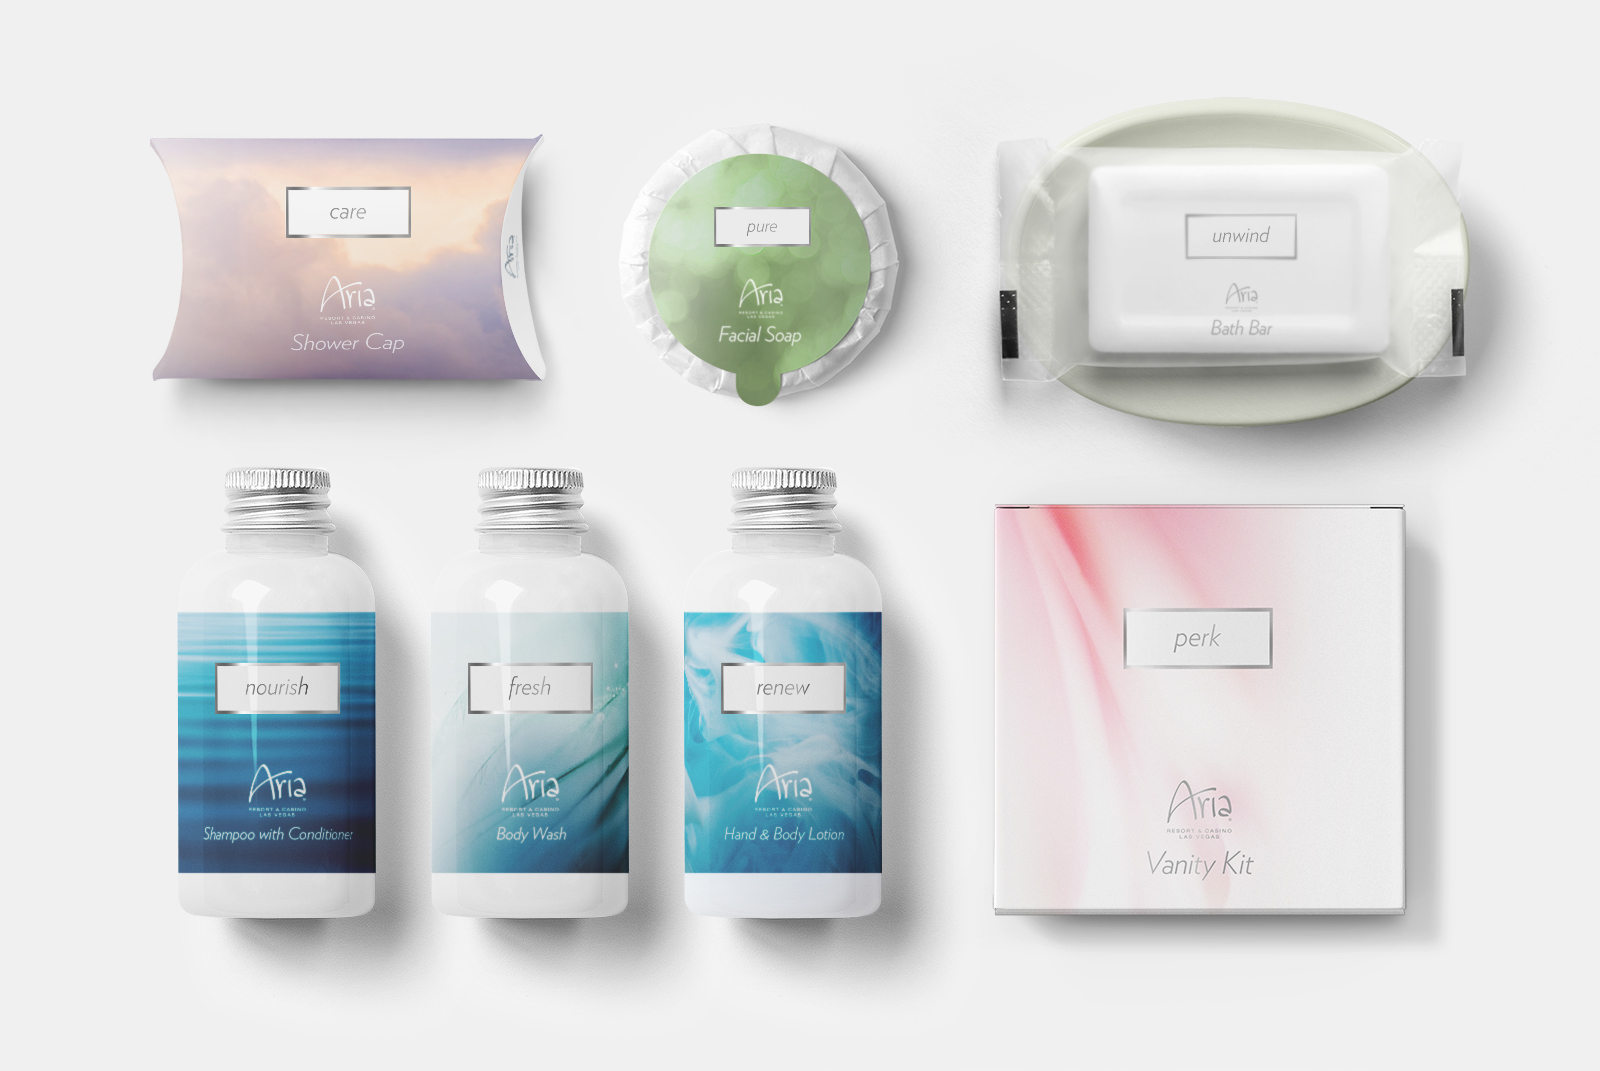 ARIA Resort and Casino Sky Suites toiletries packaging design by Silky Szeto